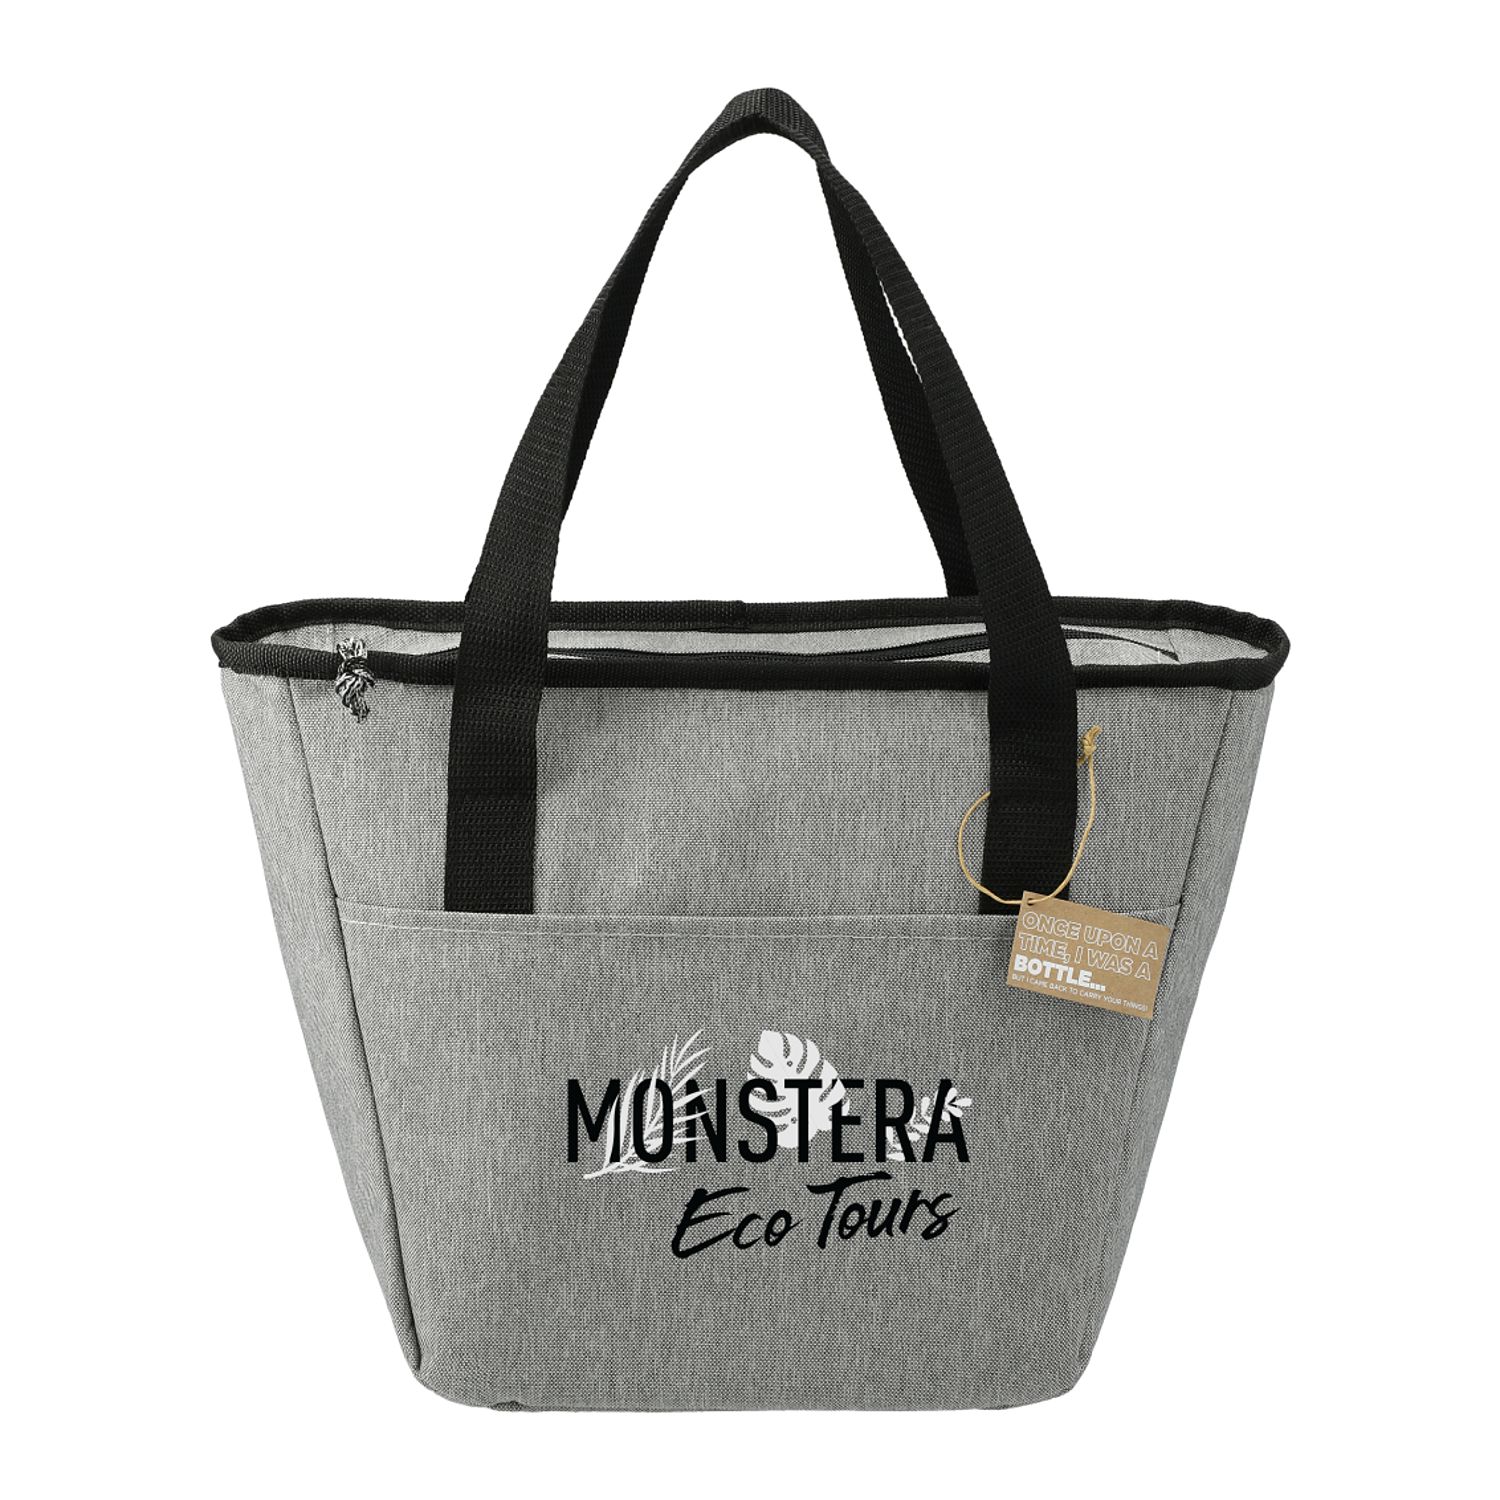 Merchant & Craft Revive Recycled 9 Can Tote Cooler